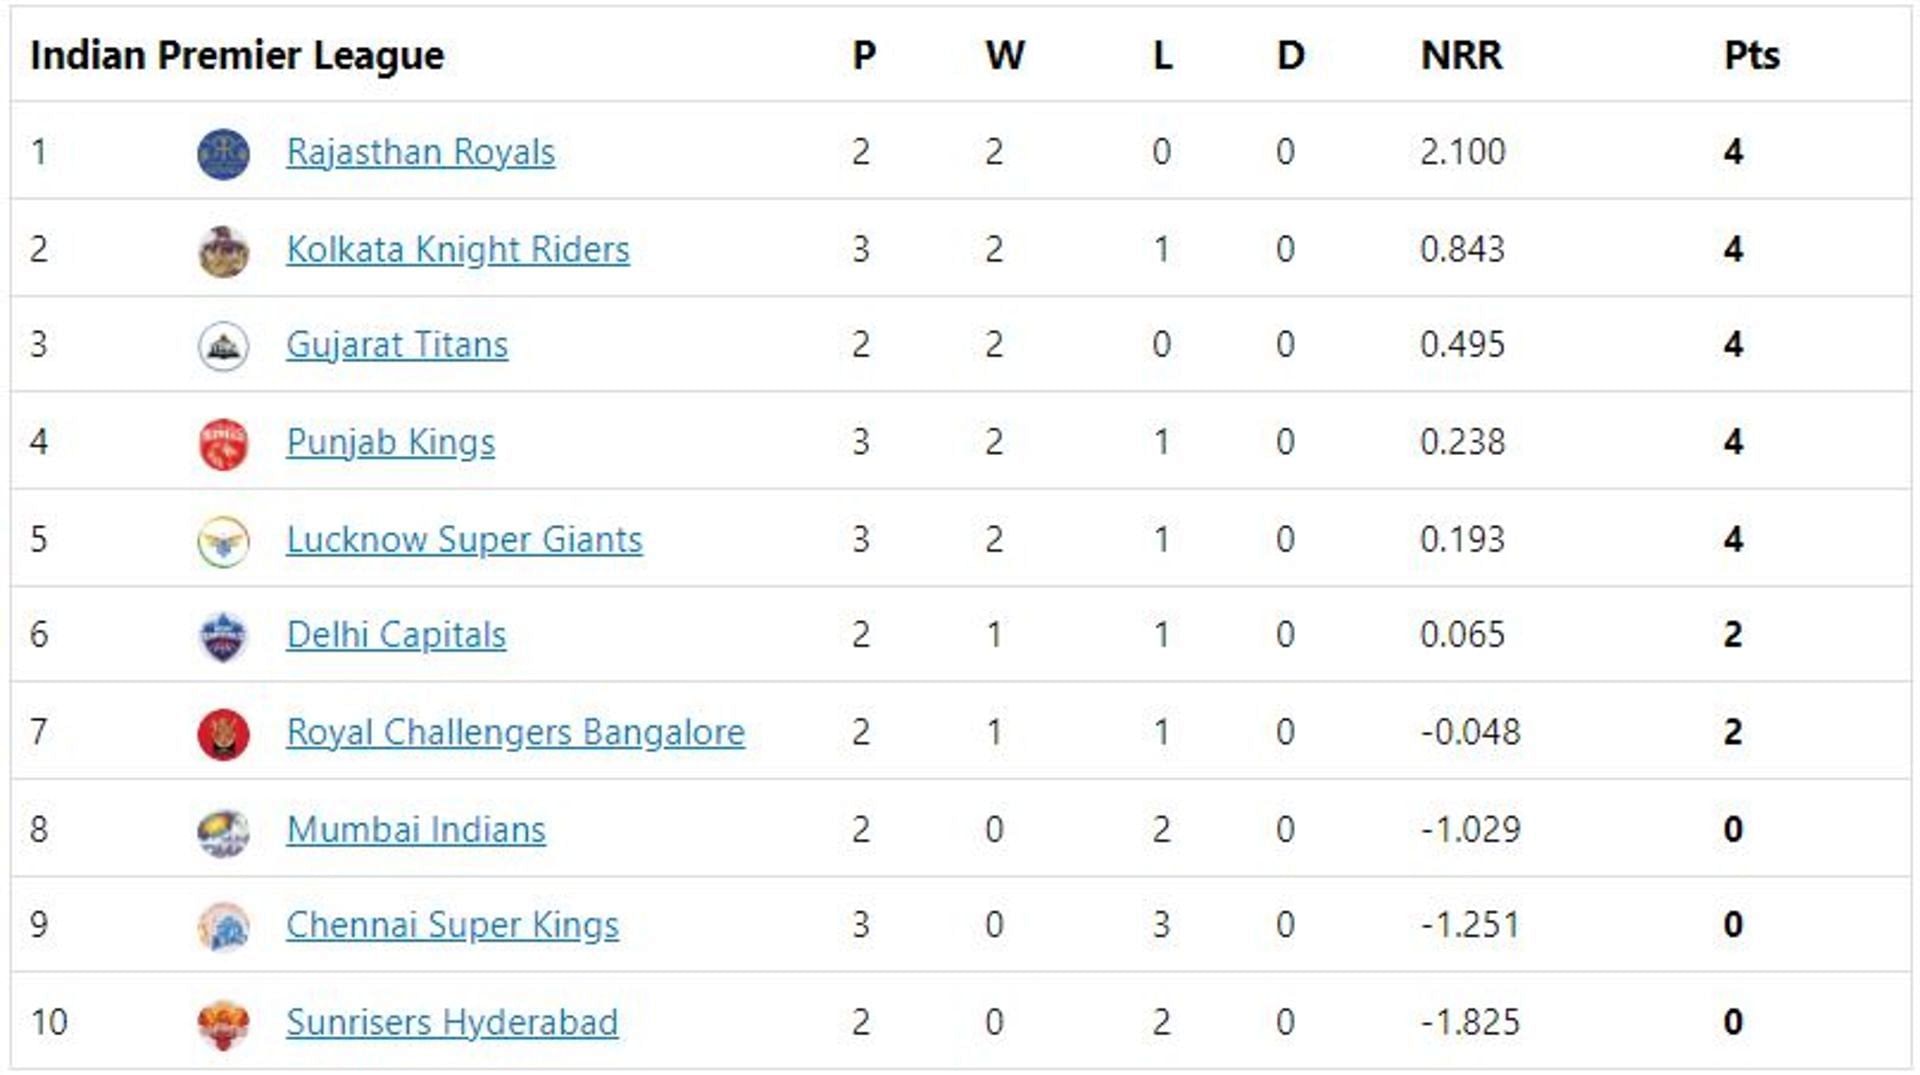 LSG enter the top half of the table with a win over SRH.